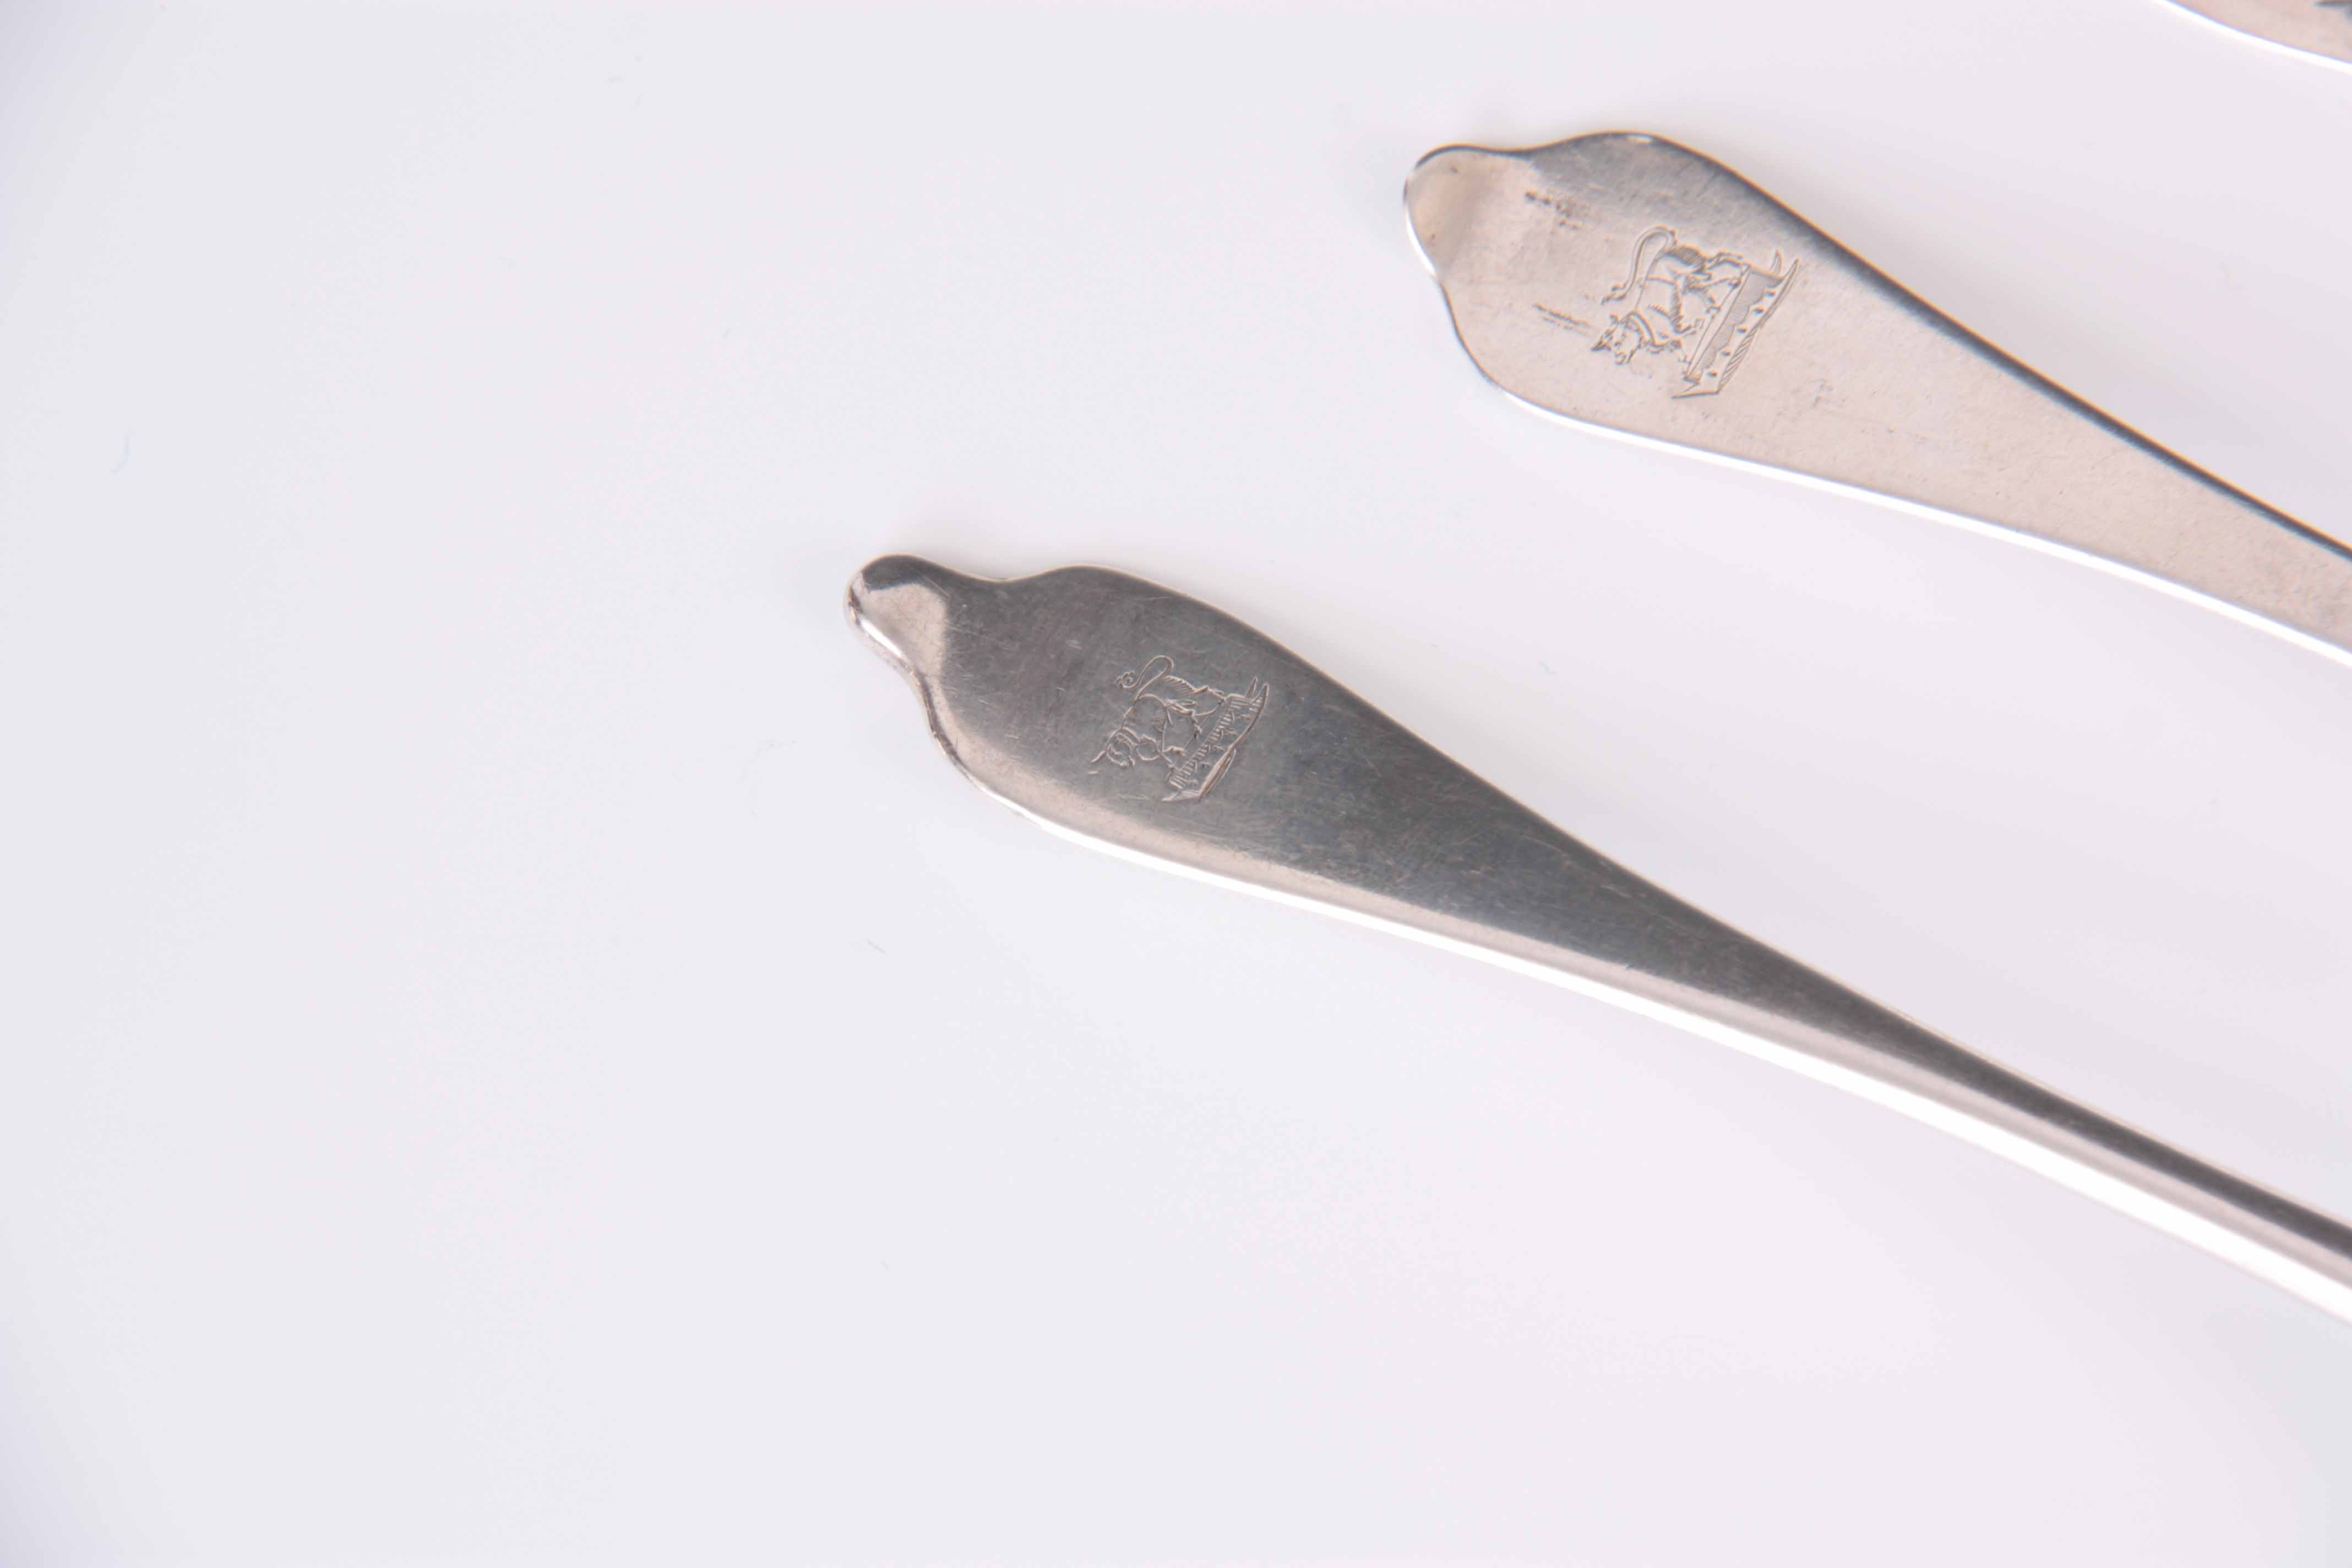 FOUR QUEEN ANN DOG NOSE SPOONS with engraved 'Bull' crests 19cm long, app. 6.5 troy oz. - Andrew - Image 3 of 7